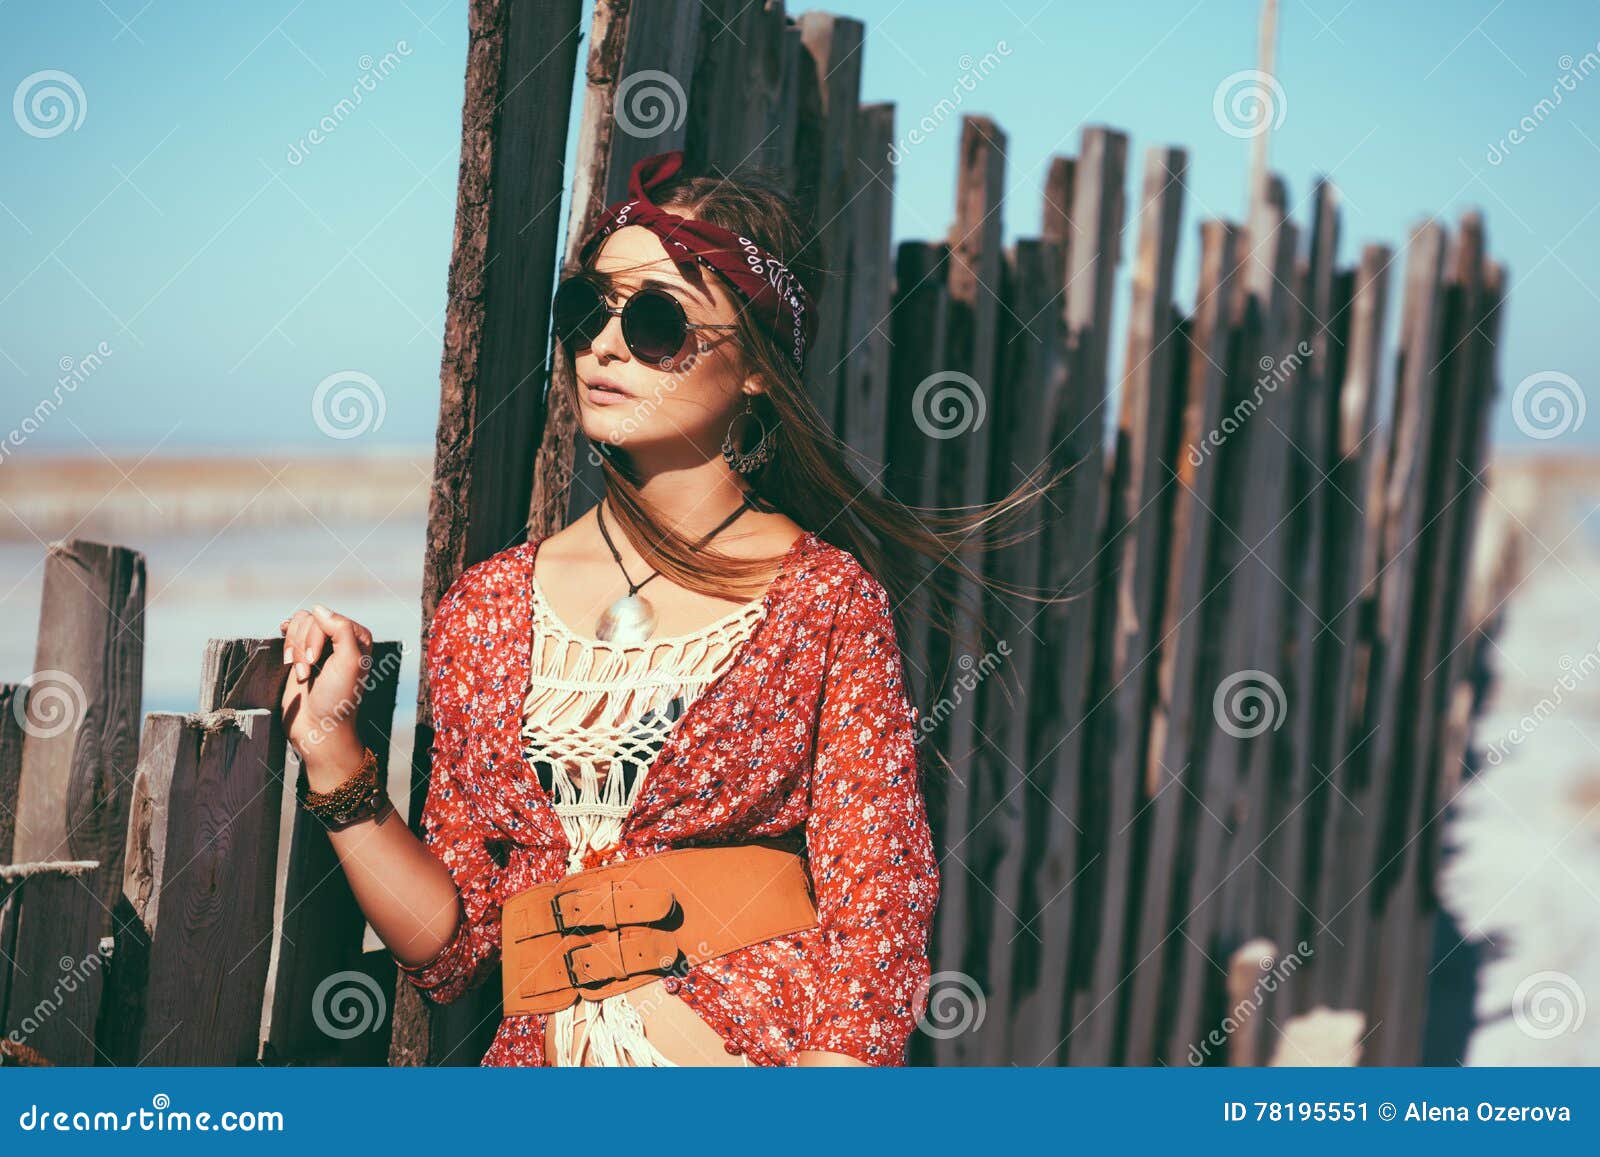 bohemian chic styled model